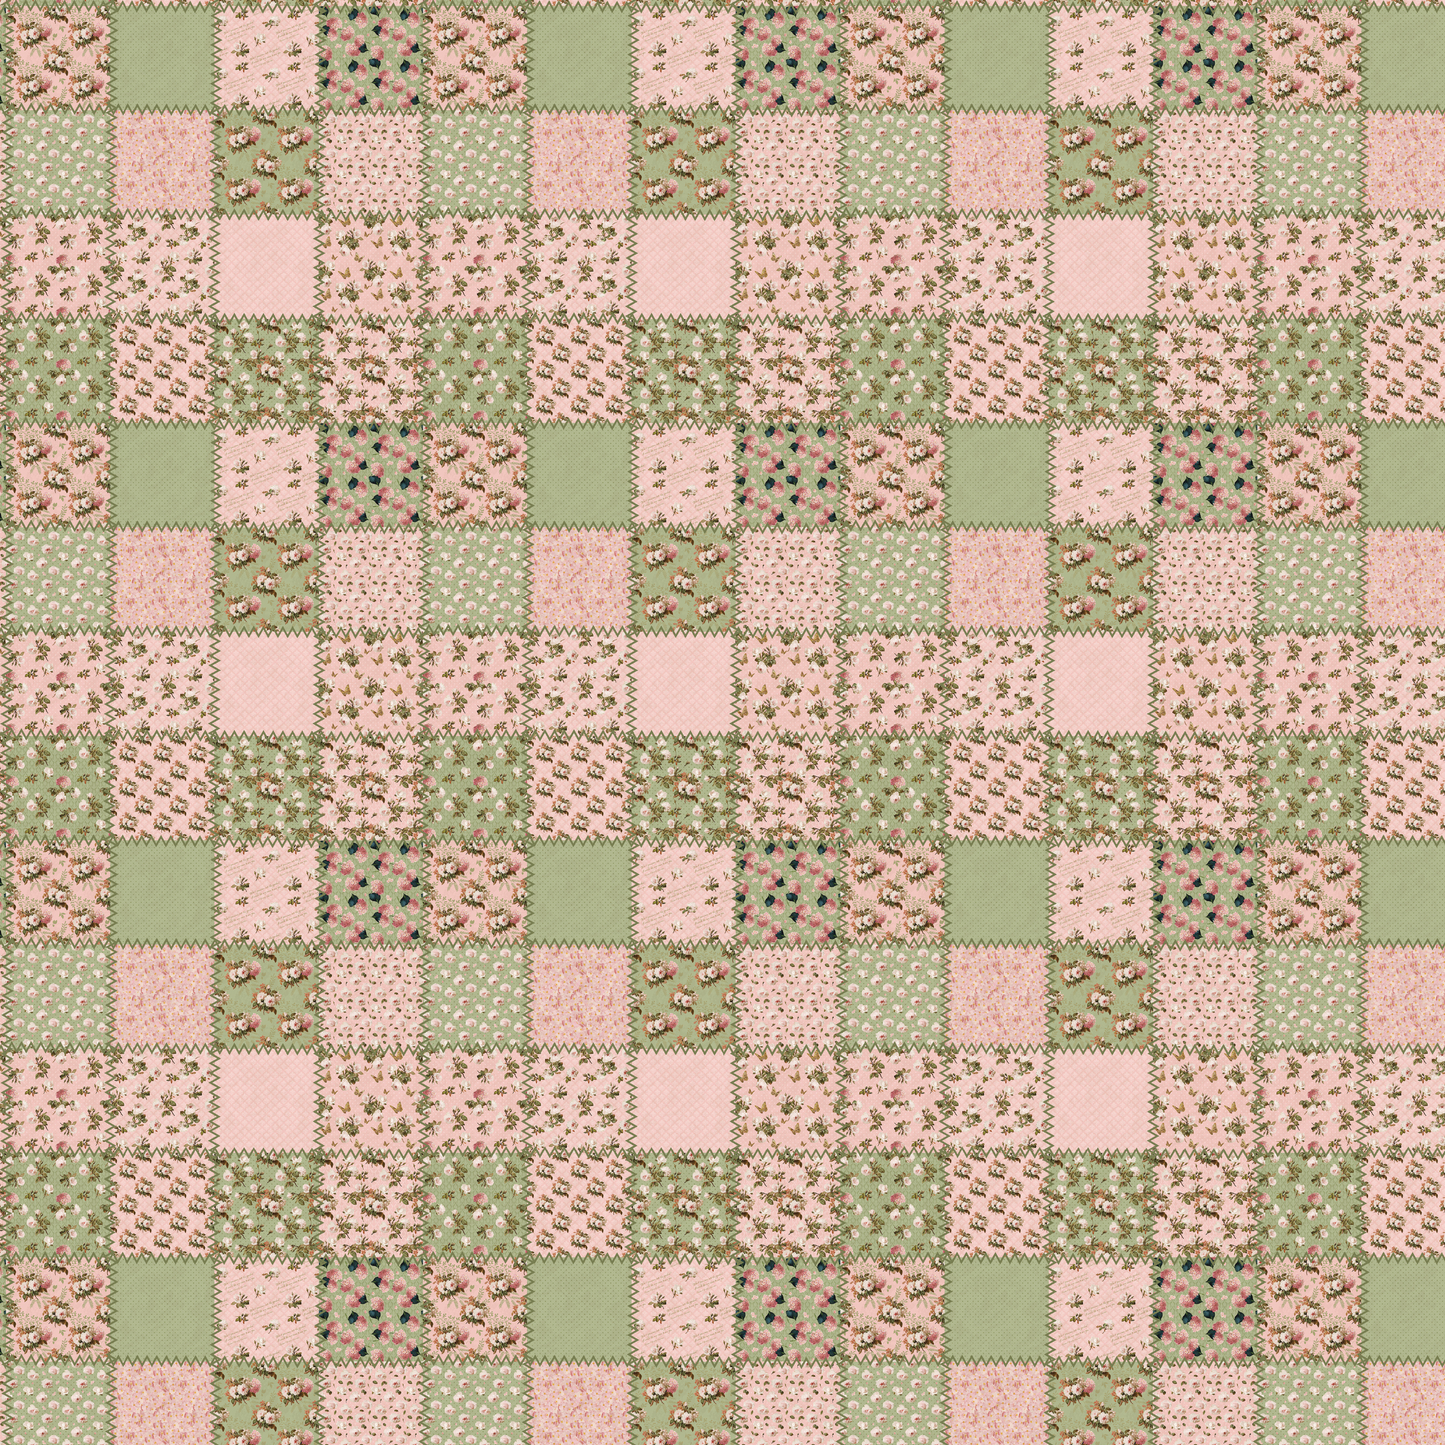 Patchwork - Pink and Green 001